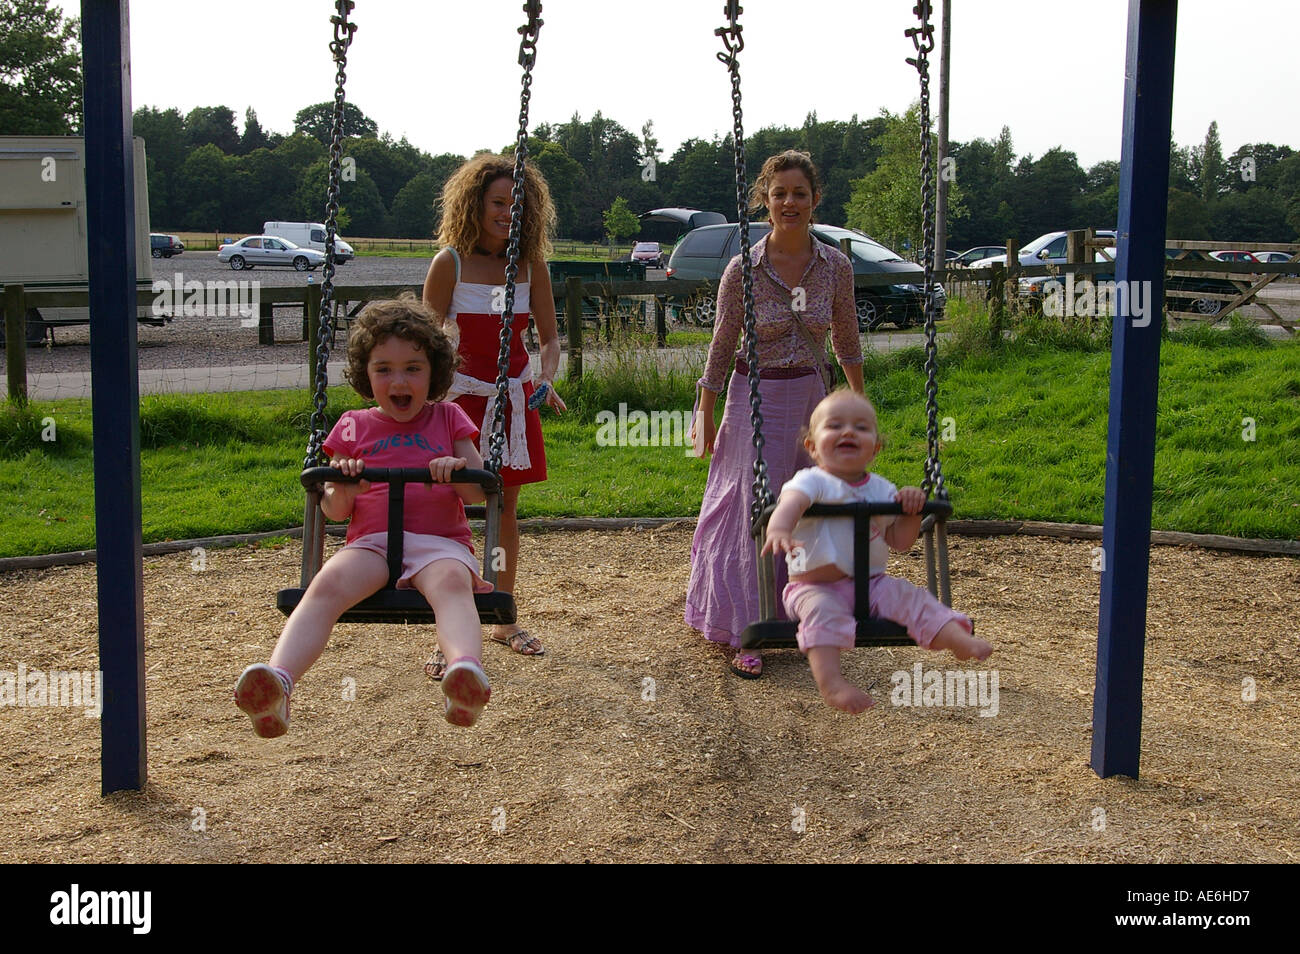 Two little girls pushed swings mother mom mum auntie aunty sisters family fun talking laughing laughter two generations women Stock Photo